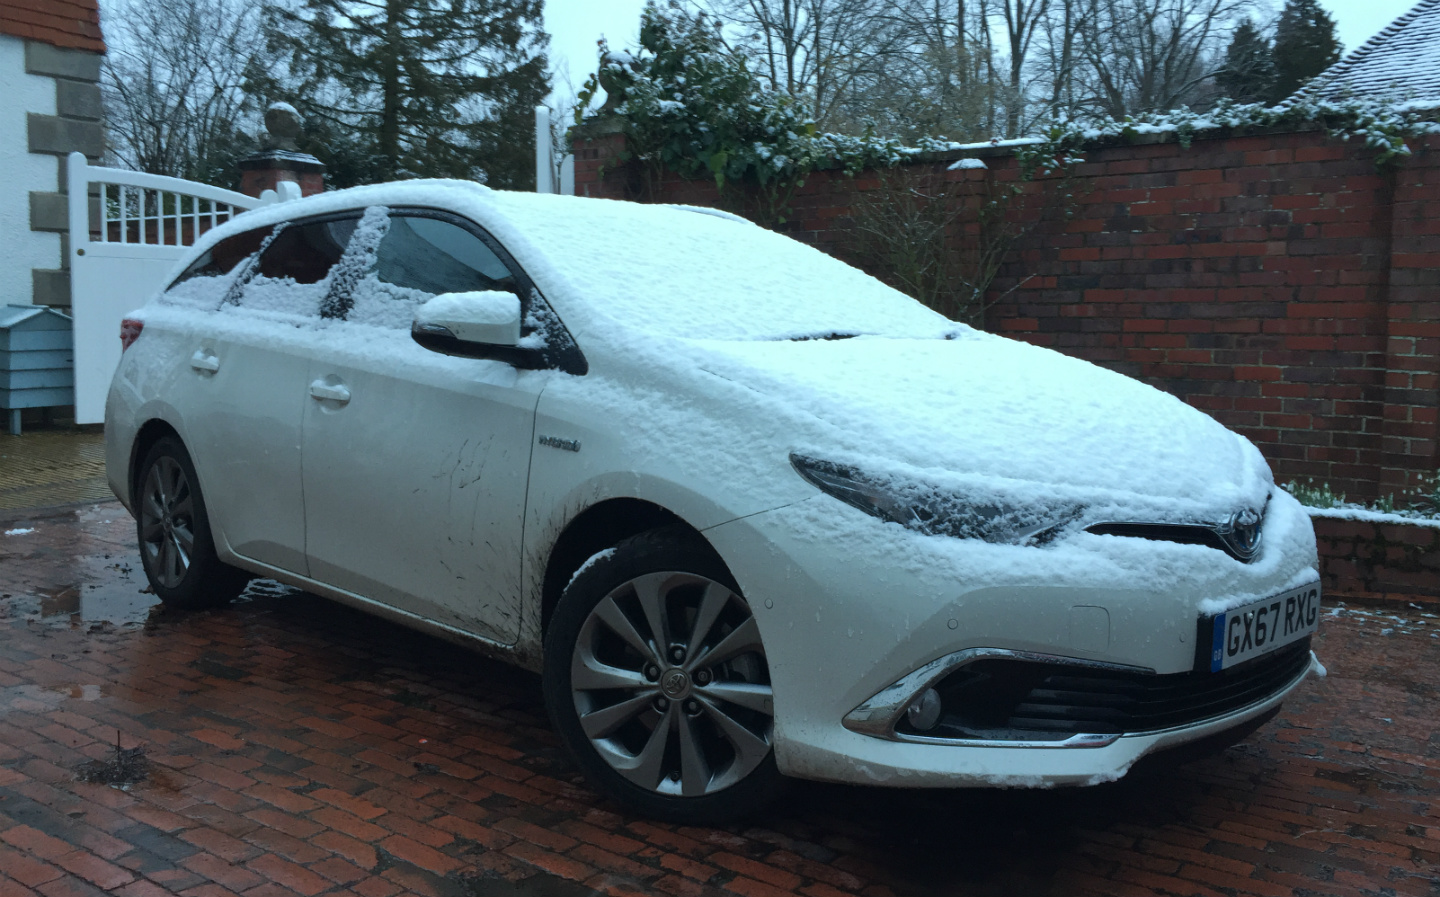 Toyota Auris hybrid Pre-Crash Safety System sensors in cold weather